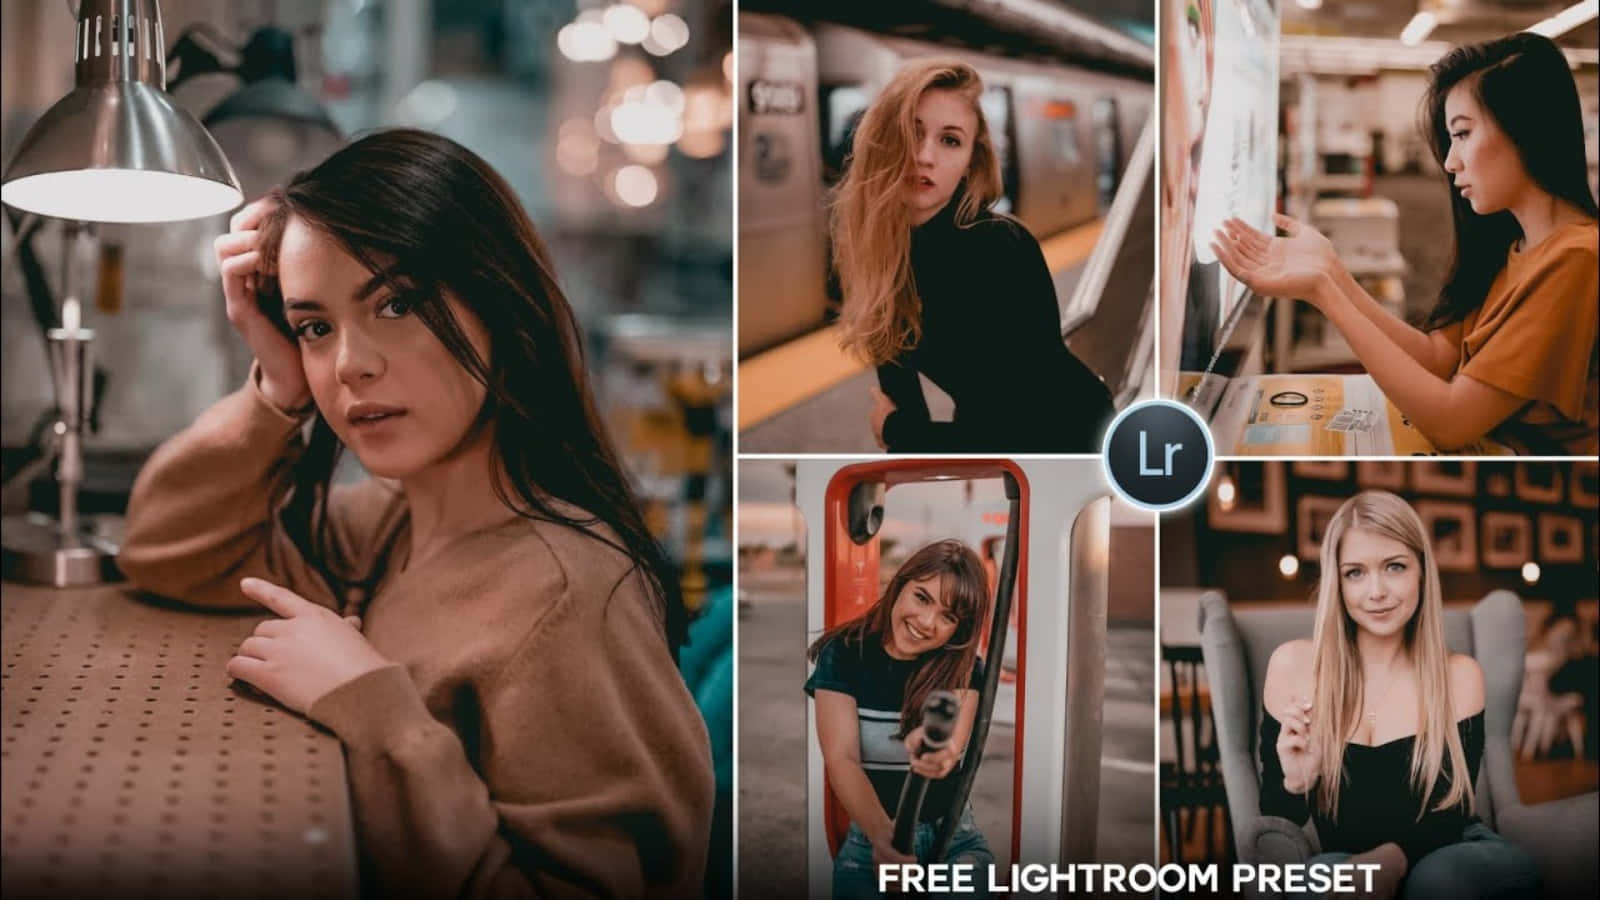 Professional-quality photo editing made easy with Lightroom Presets